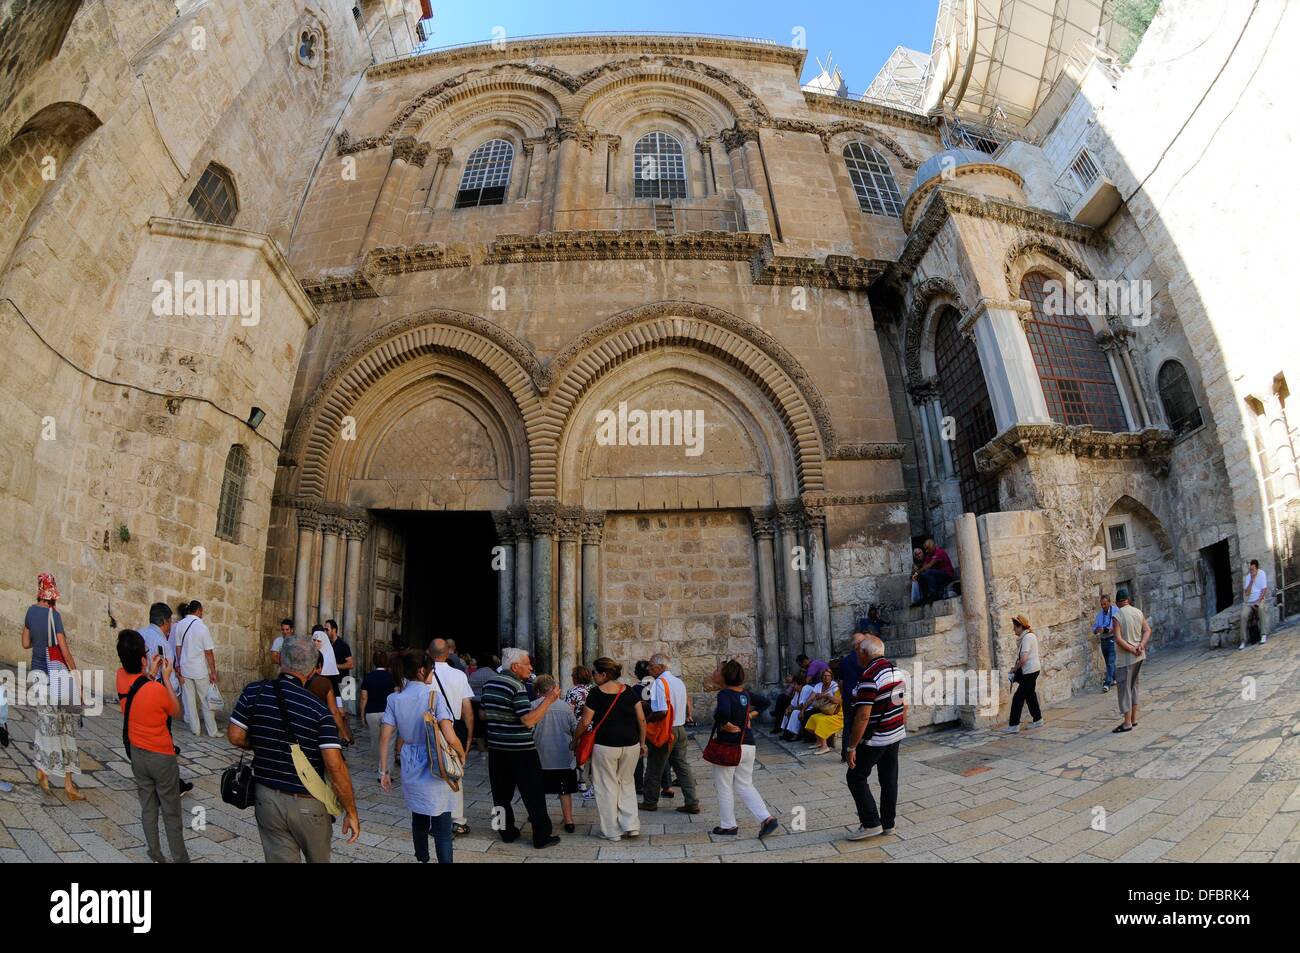 View of the entrance of the Church of the Holy Sepulchre, which contains the last five stations of the Via Dolorosa, in Jerusalem, Israel, 10 September 2013. The Via Dolorosa (Way of Suffering) is a street in the old town of Jerusalem named after the path Jesus of Nazareth walked to his crucification. Jesus carried the cross, on which he later died via that road from the Antonia Fortress, then seat of Pilate, to Golgotha, the place where his grave is supposedly located. Above this place, the Church of the Holy Sepulchre was later built. The path led Jesus via 14 stations that are often visited Stock Photo